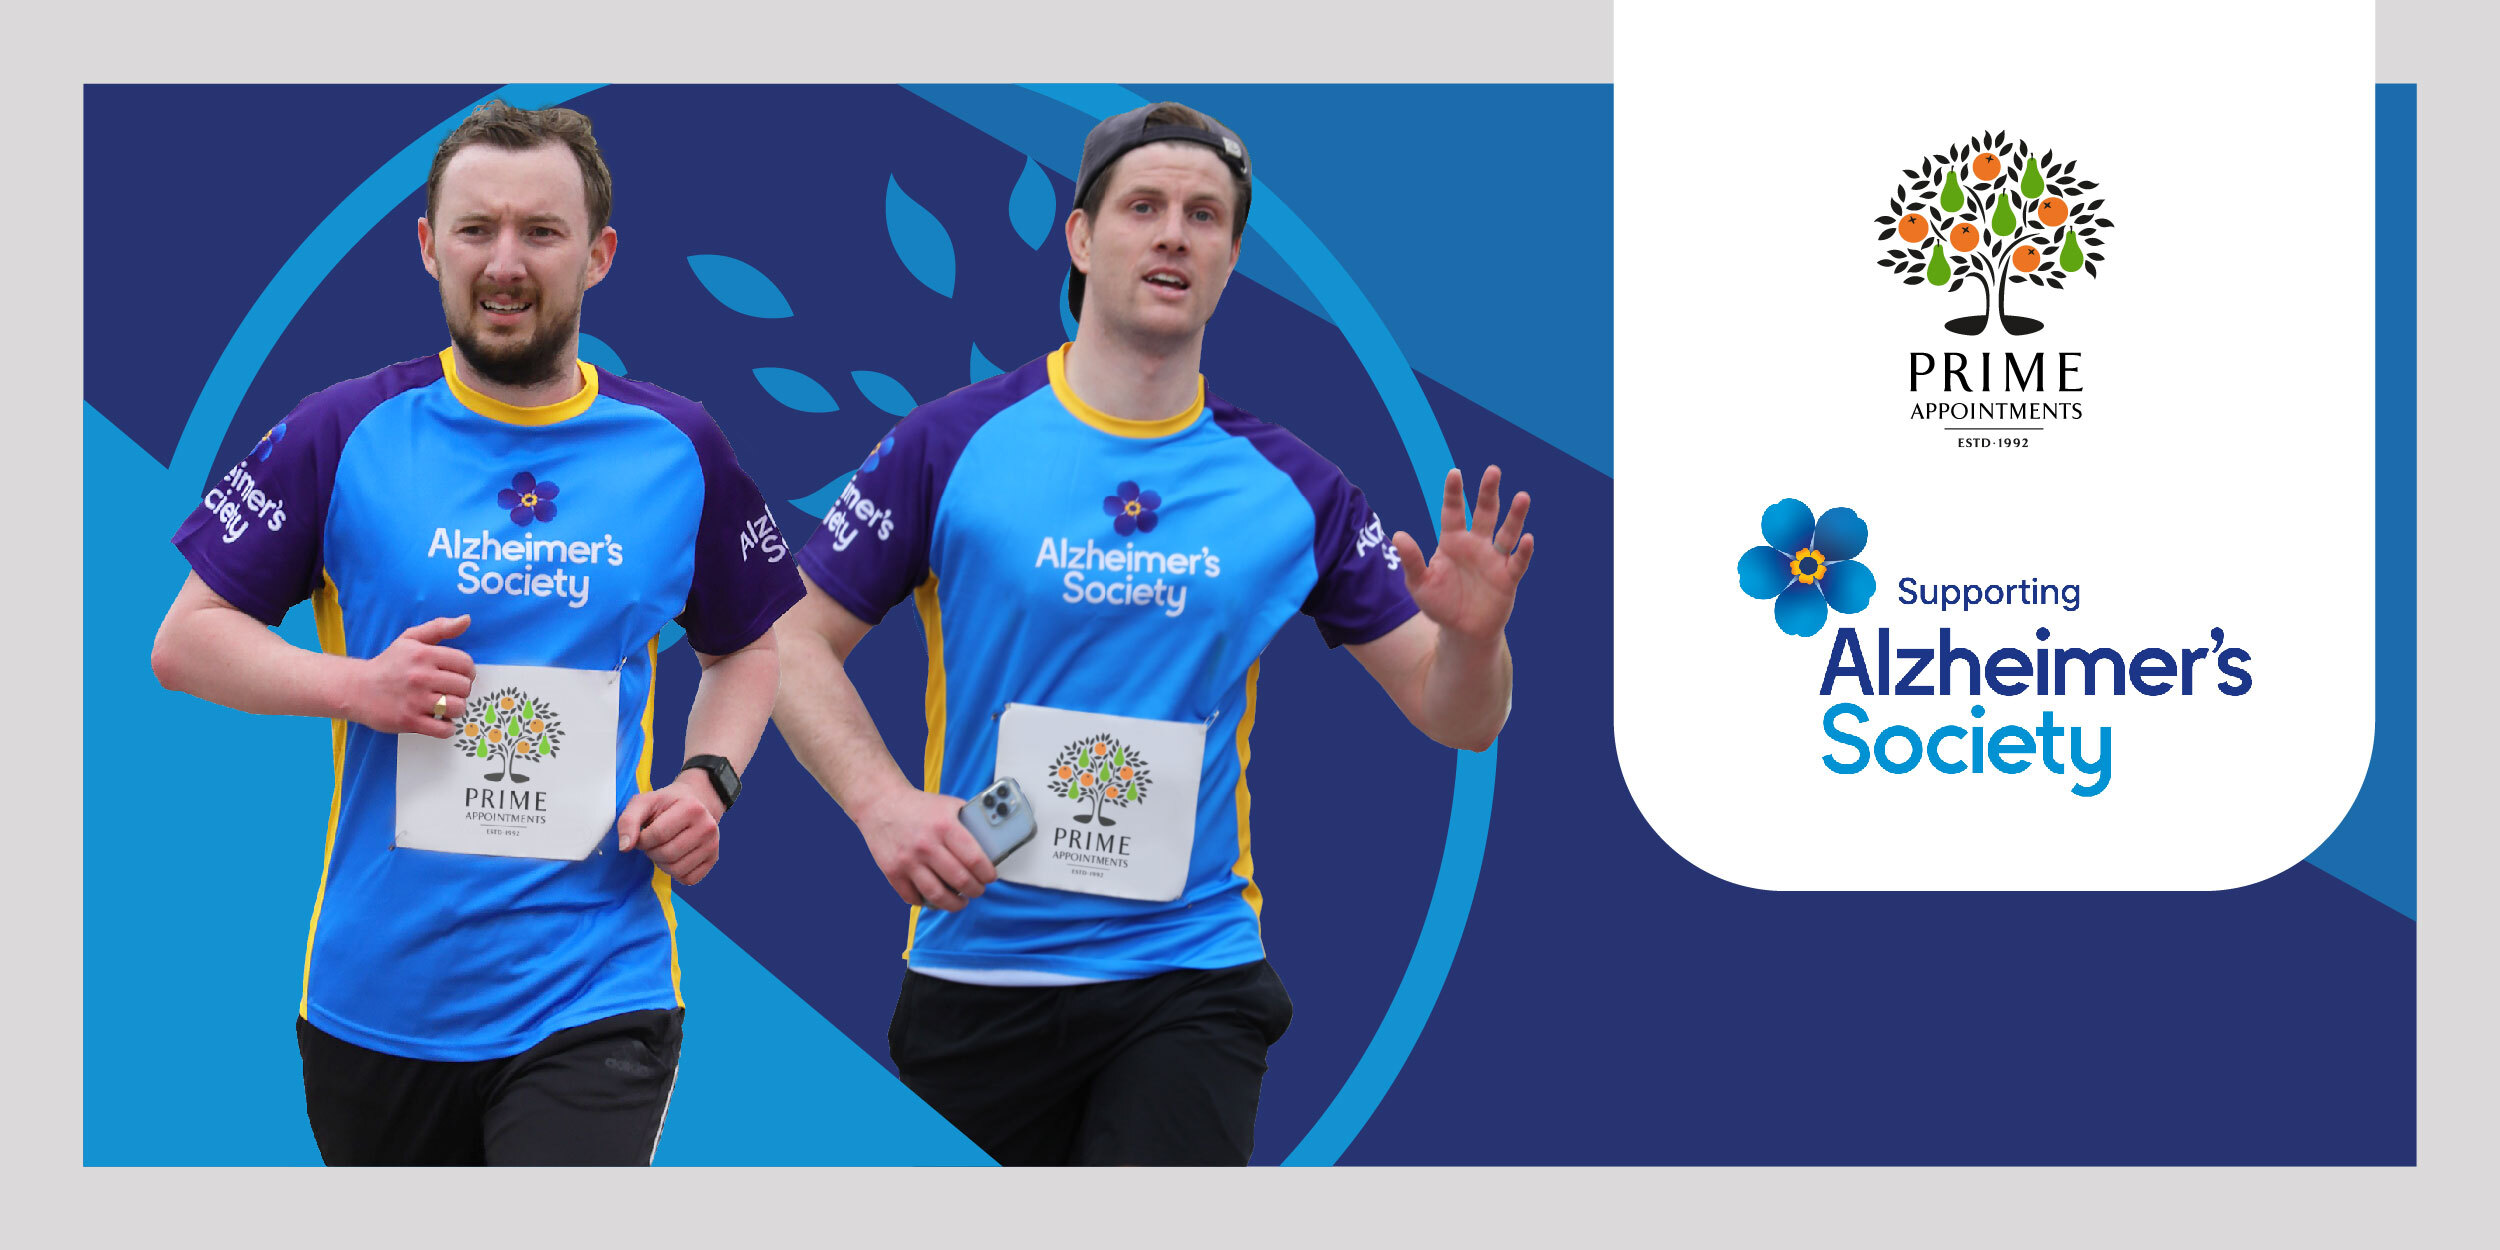 Image of Craig Turnbull and Jack O'Brien running in their Alzheimer's T-shirts with Prime Appointments on